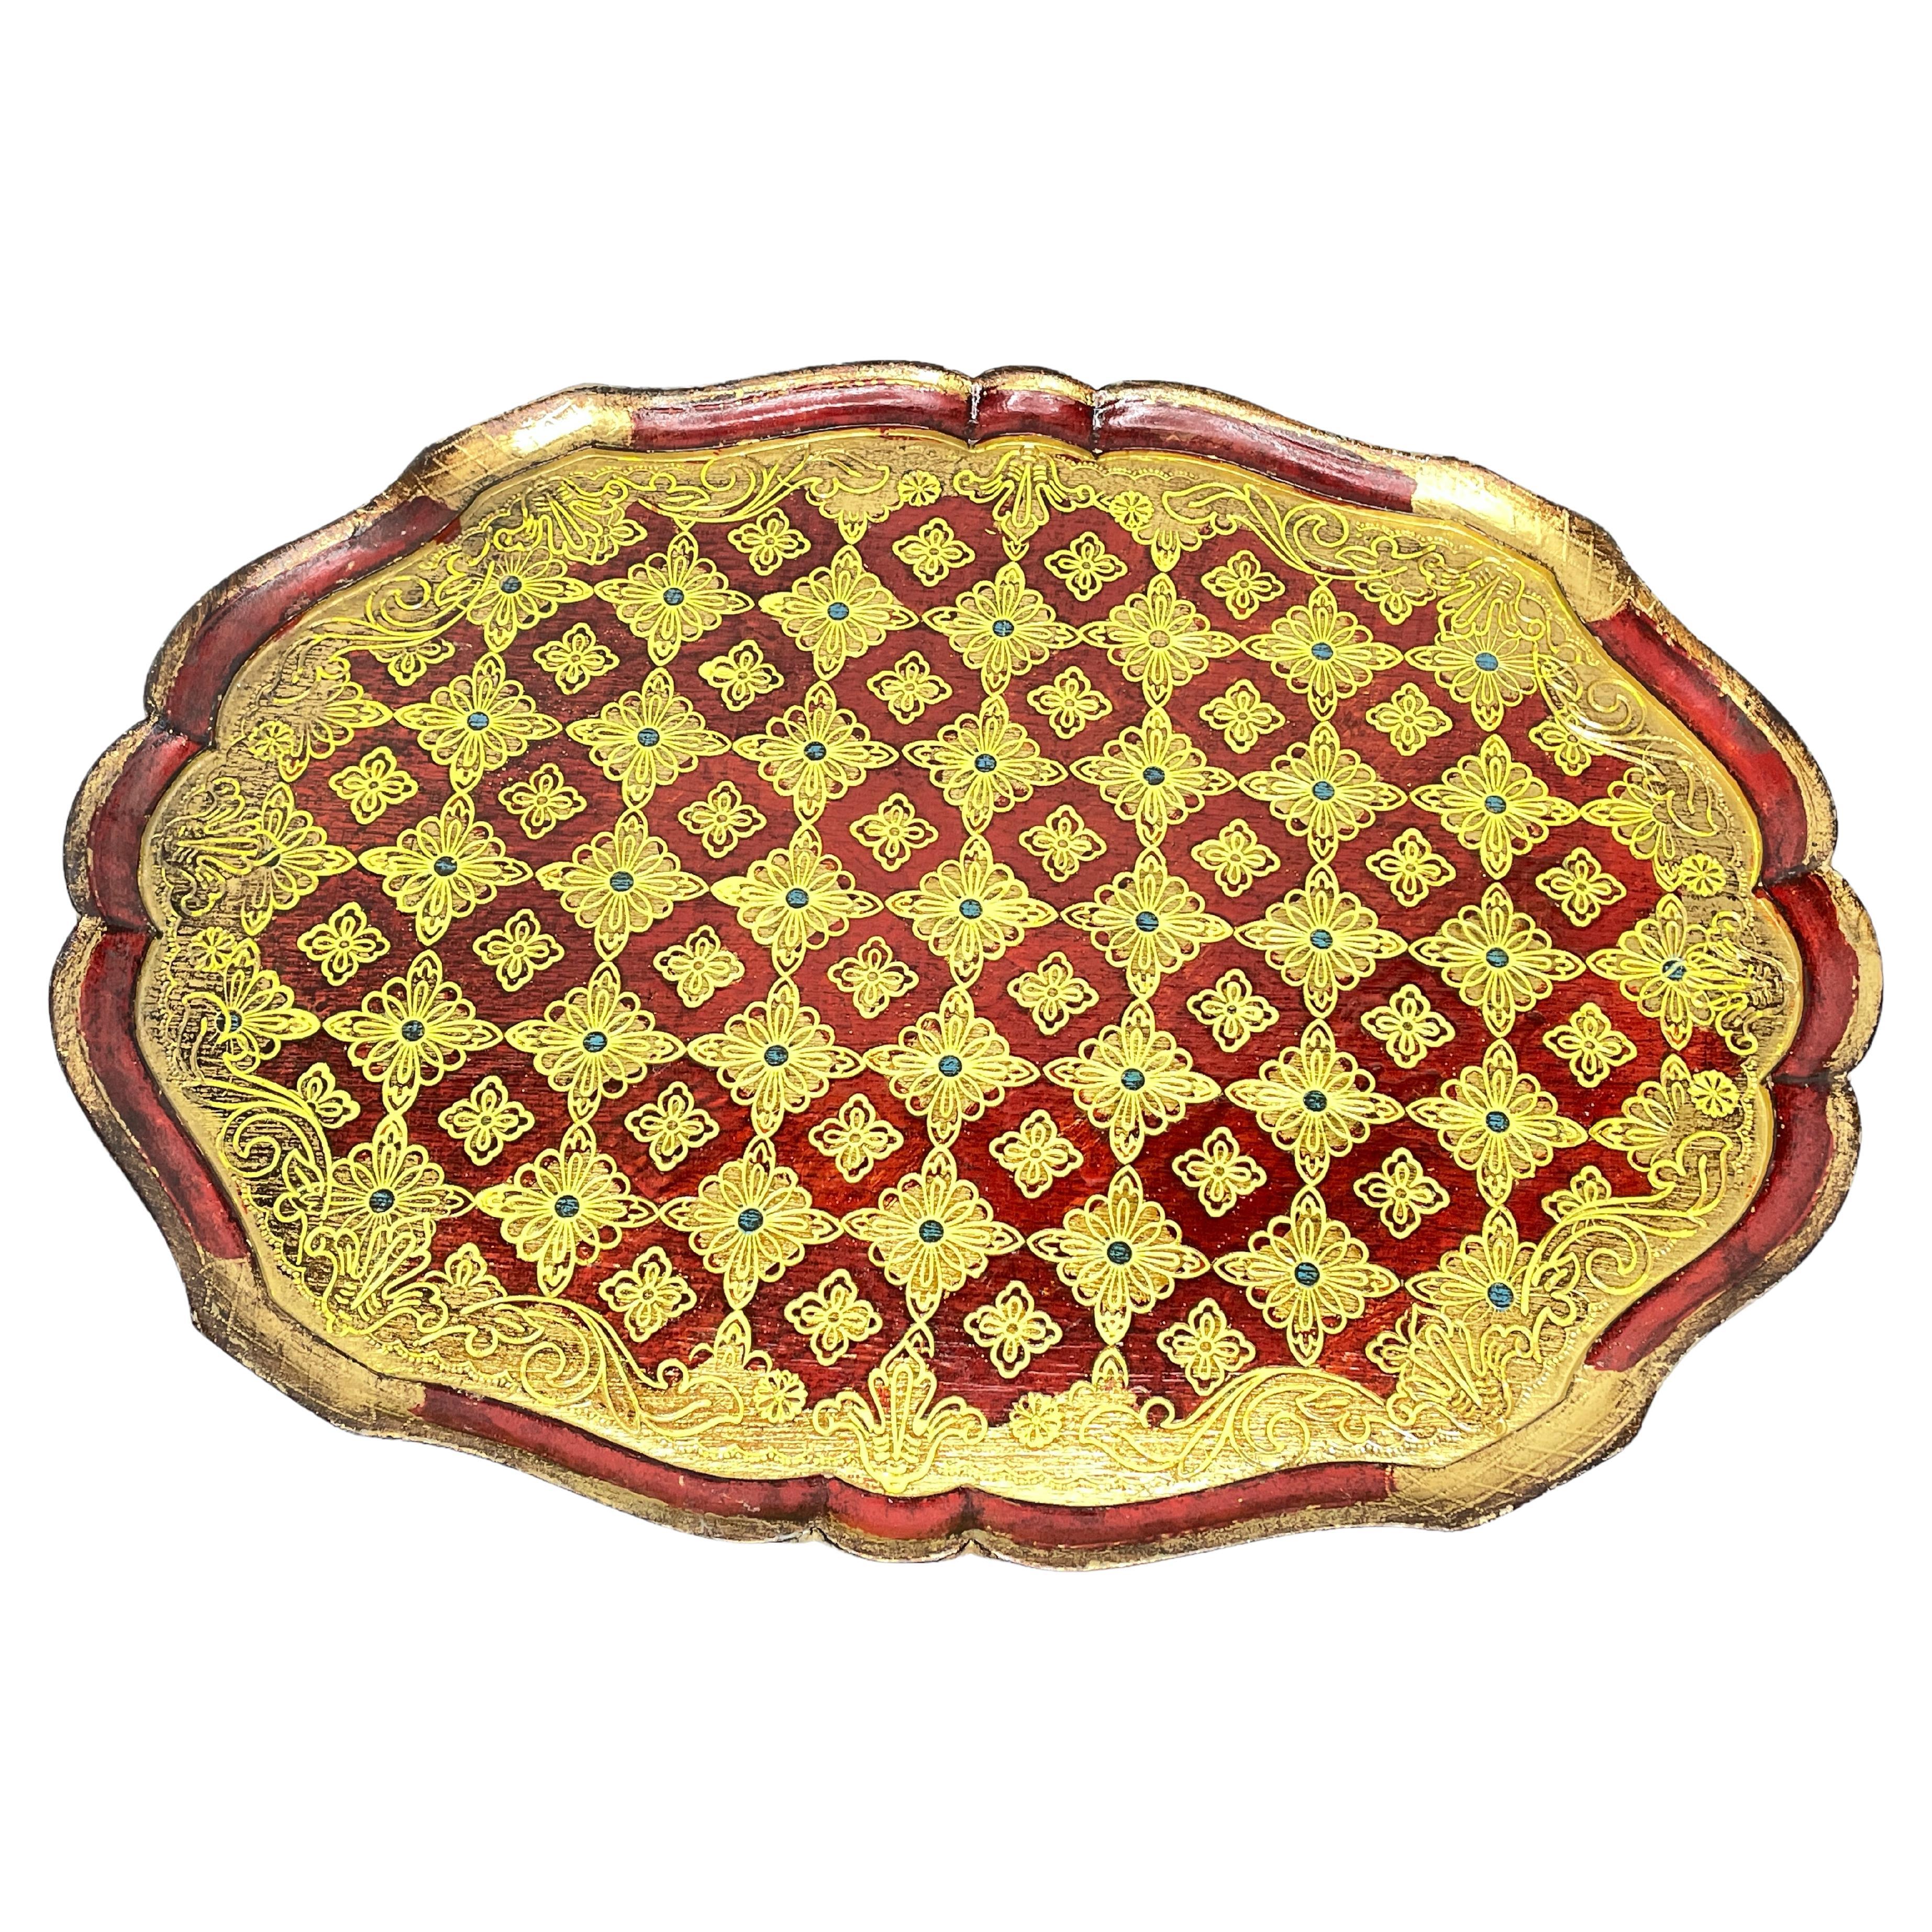 Stunning Italian Florentine Gilded Gilt Wood Serving Tray Toleware Tole, 1960s For Sale